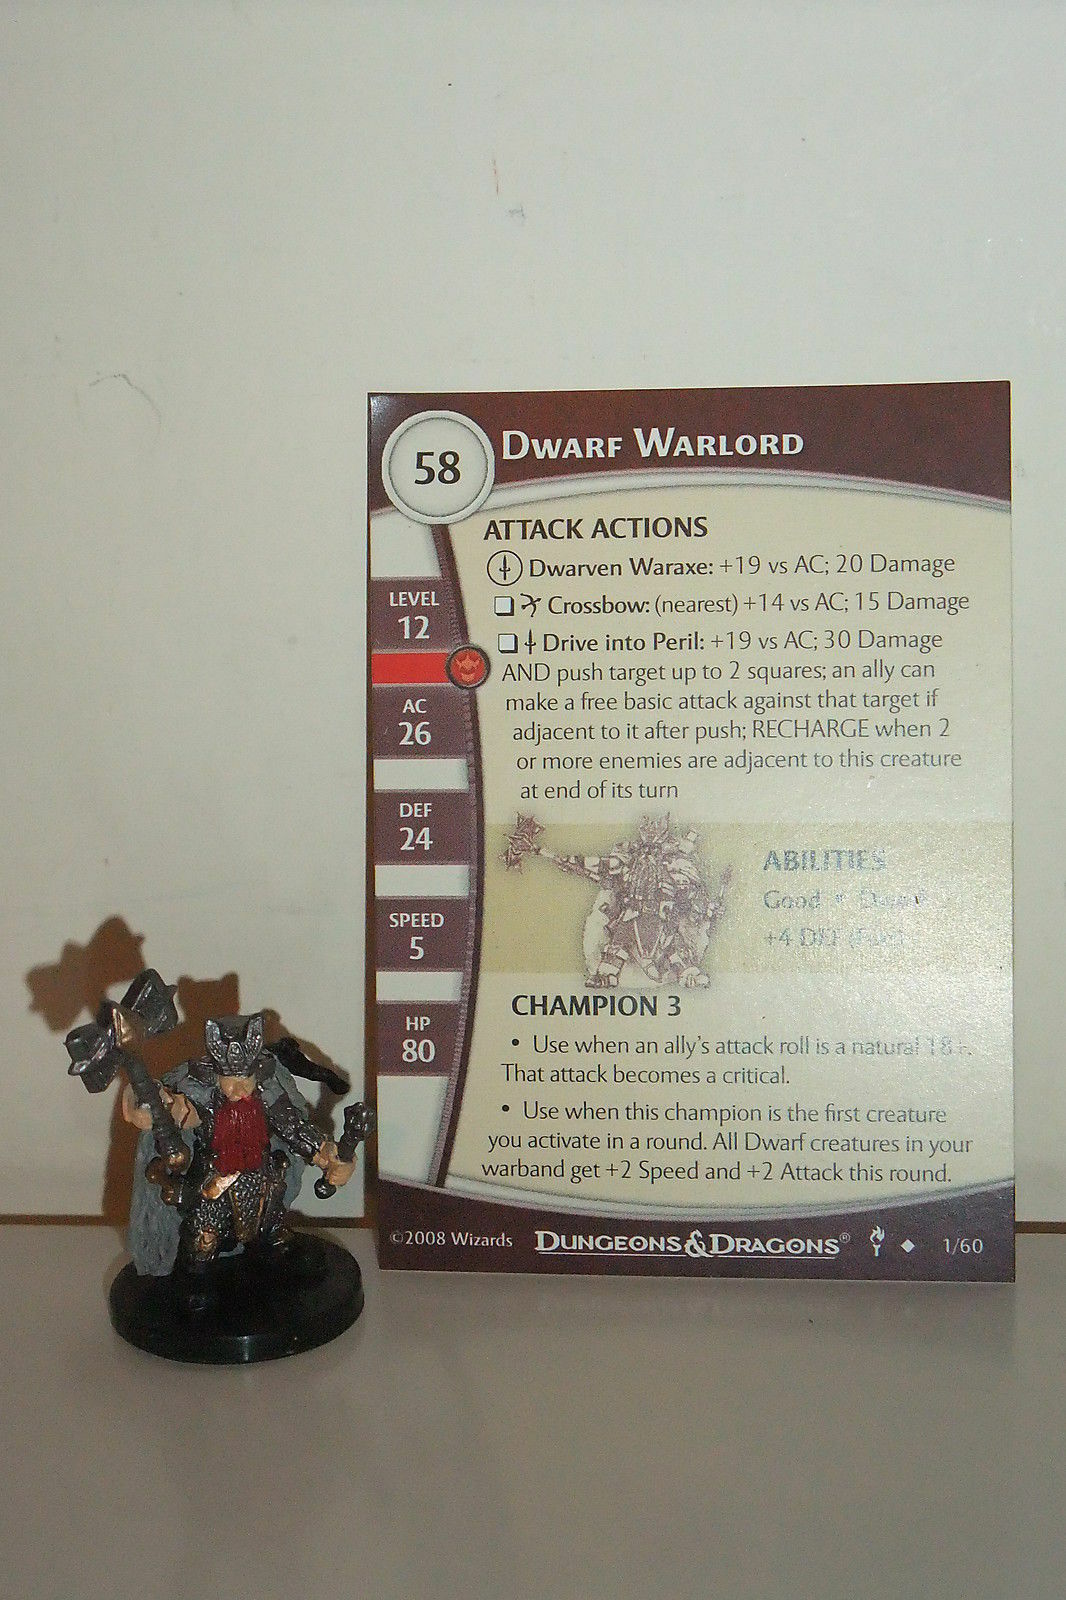 Dungeons & Dragons Miniatures DWARF WARLORD - Dungeons of Dread (Cod. D&D 68) Du